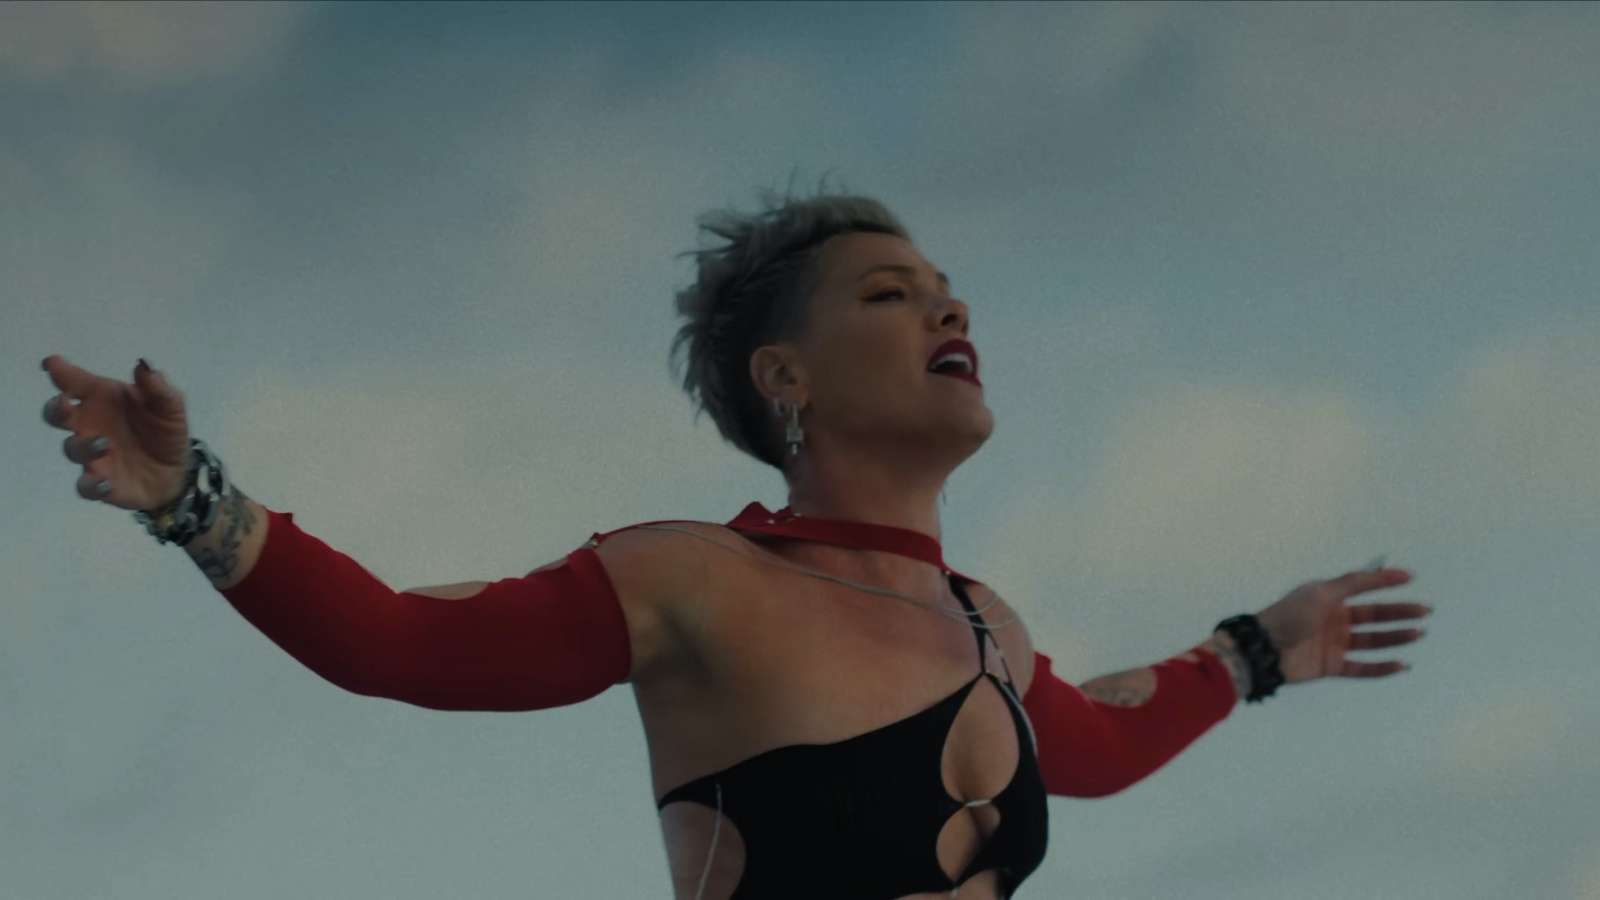 Singer P!nk with her arms open wide in front of a cloudy blue sky